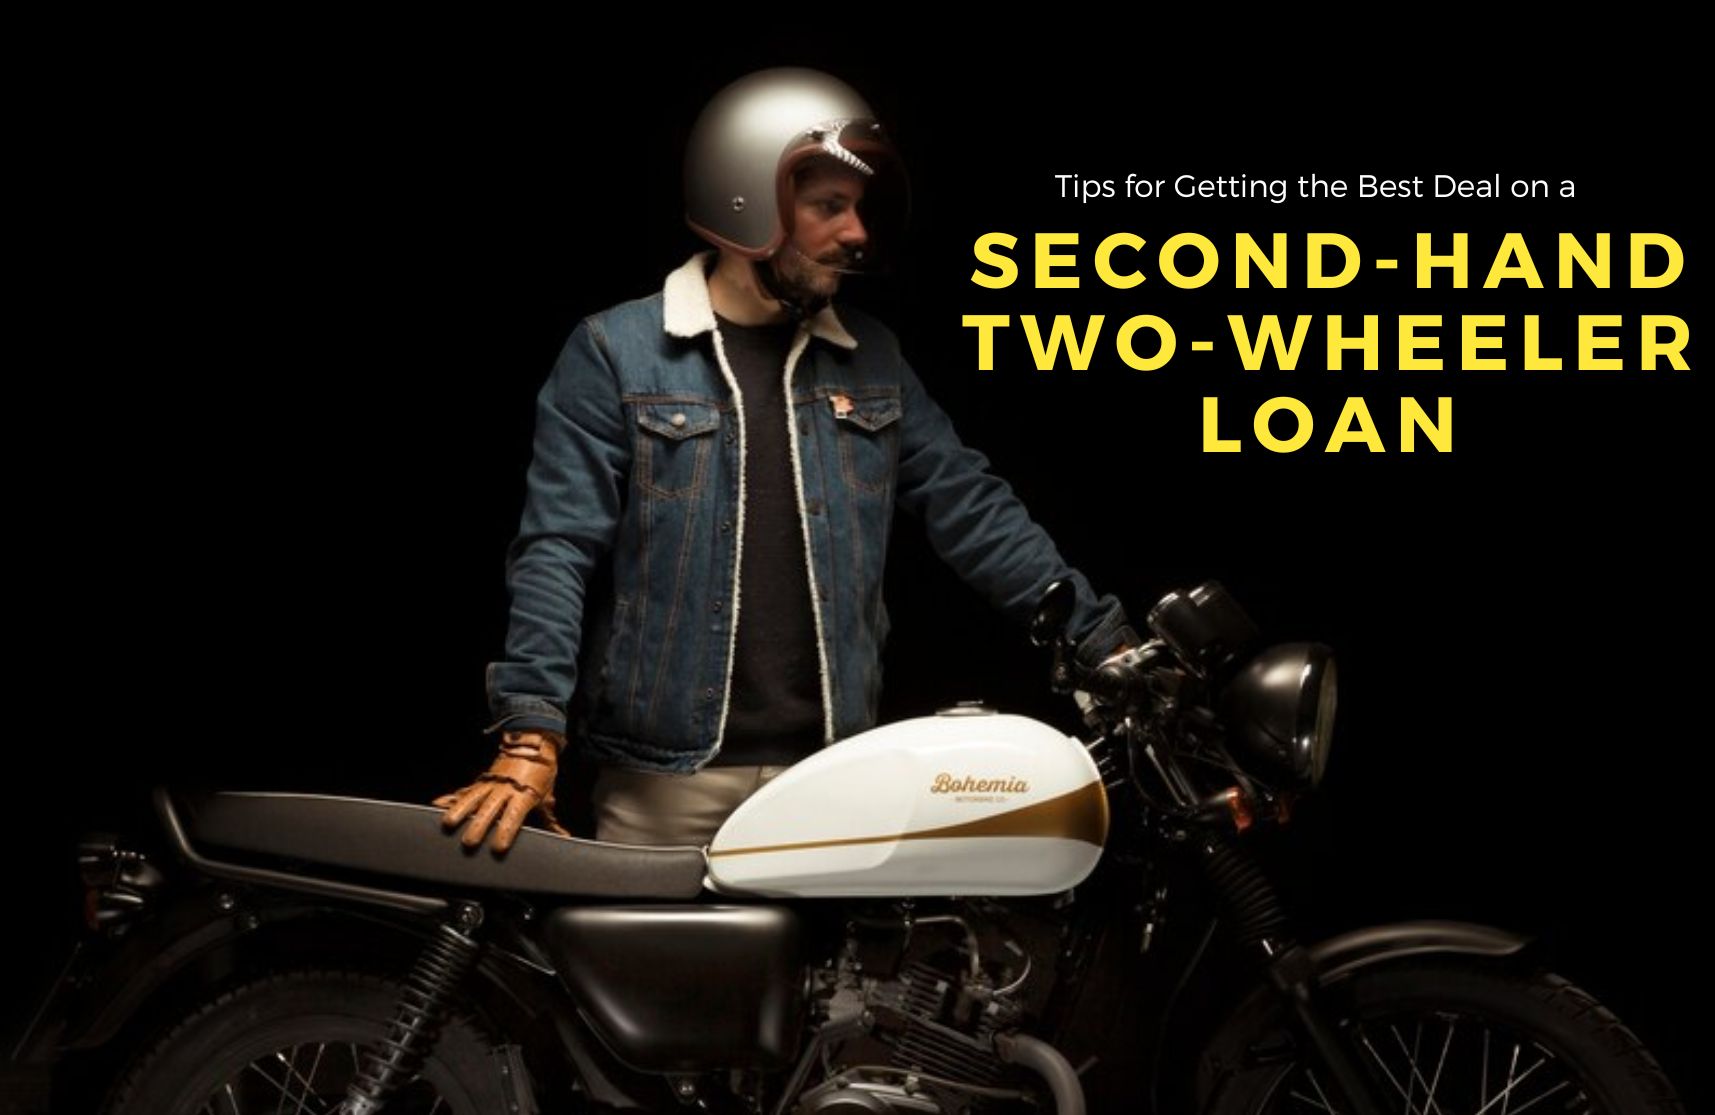 Tips for Getting the Best Deal on a Second-Hand Two-Wheeler Loan